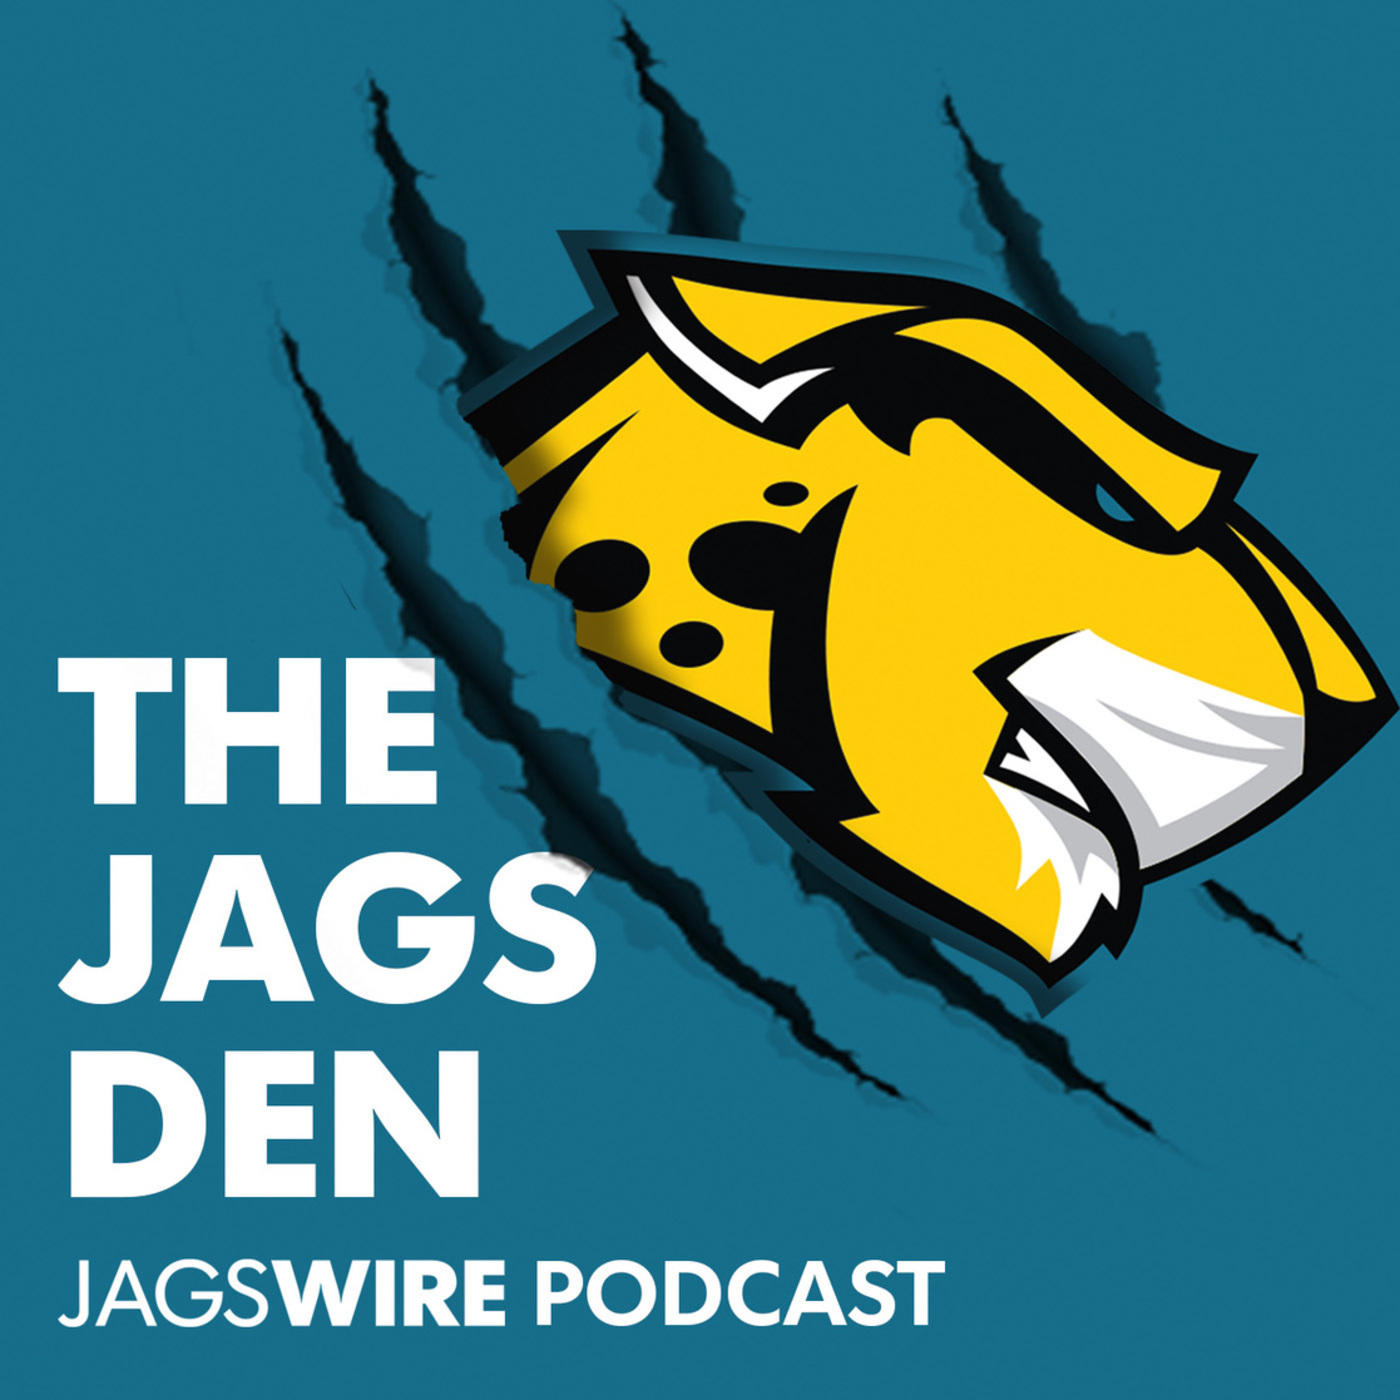 Jags Den Podcast Ep. 22 (Part 2): Discussions on a Fowler/ Bridgewater trade, why competition shouldn't exempt from the QB position, Bojangles and Popeyes pitch